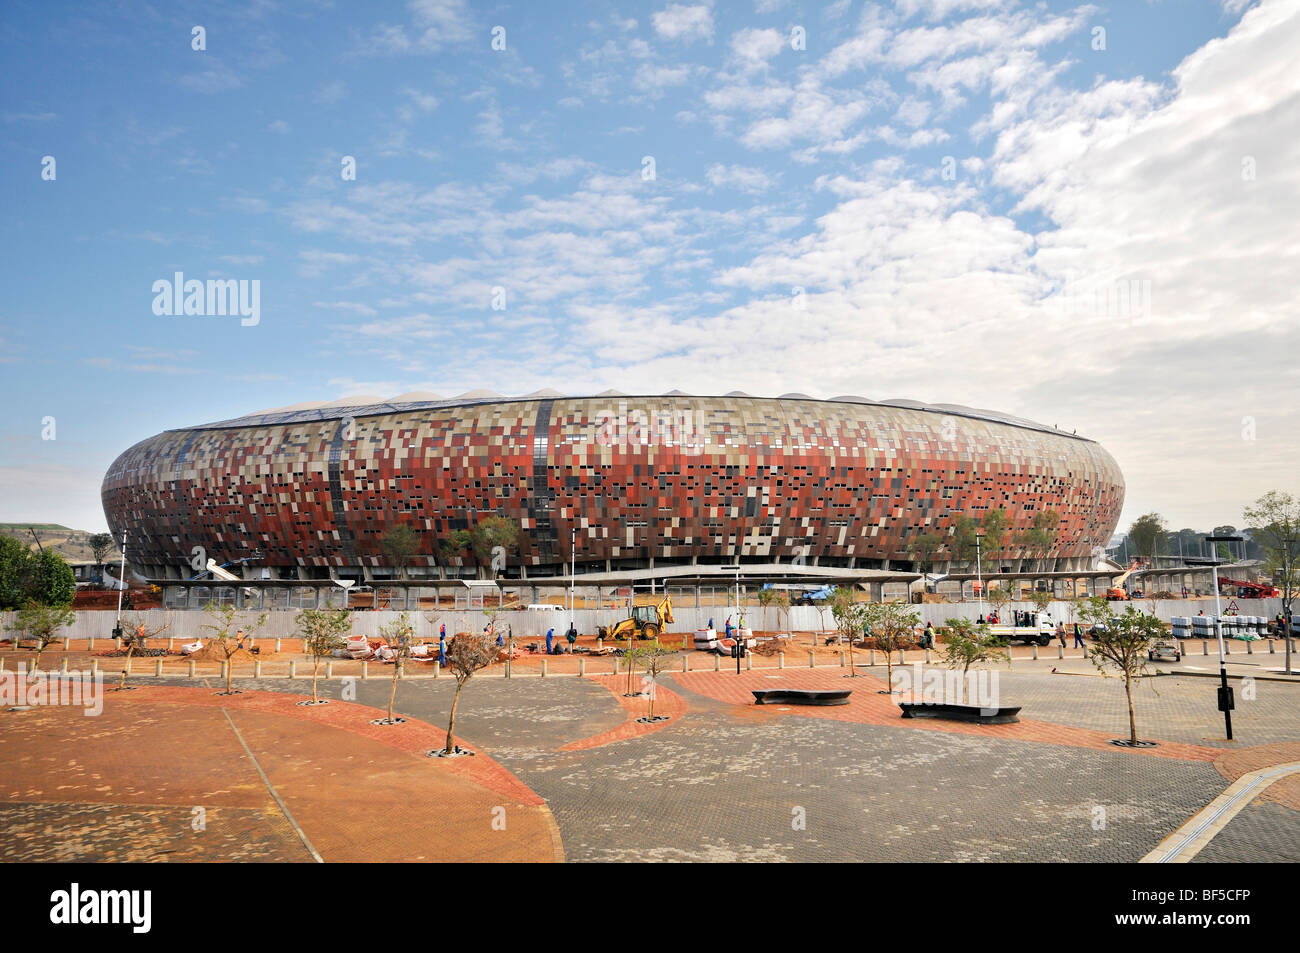 FIFA World Cup 2010, construction site of the Soccer City Stadium in the Soweto district, Johannesburg, South Africa, Africa Stock Photo